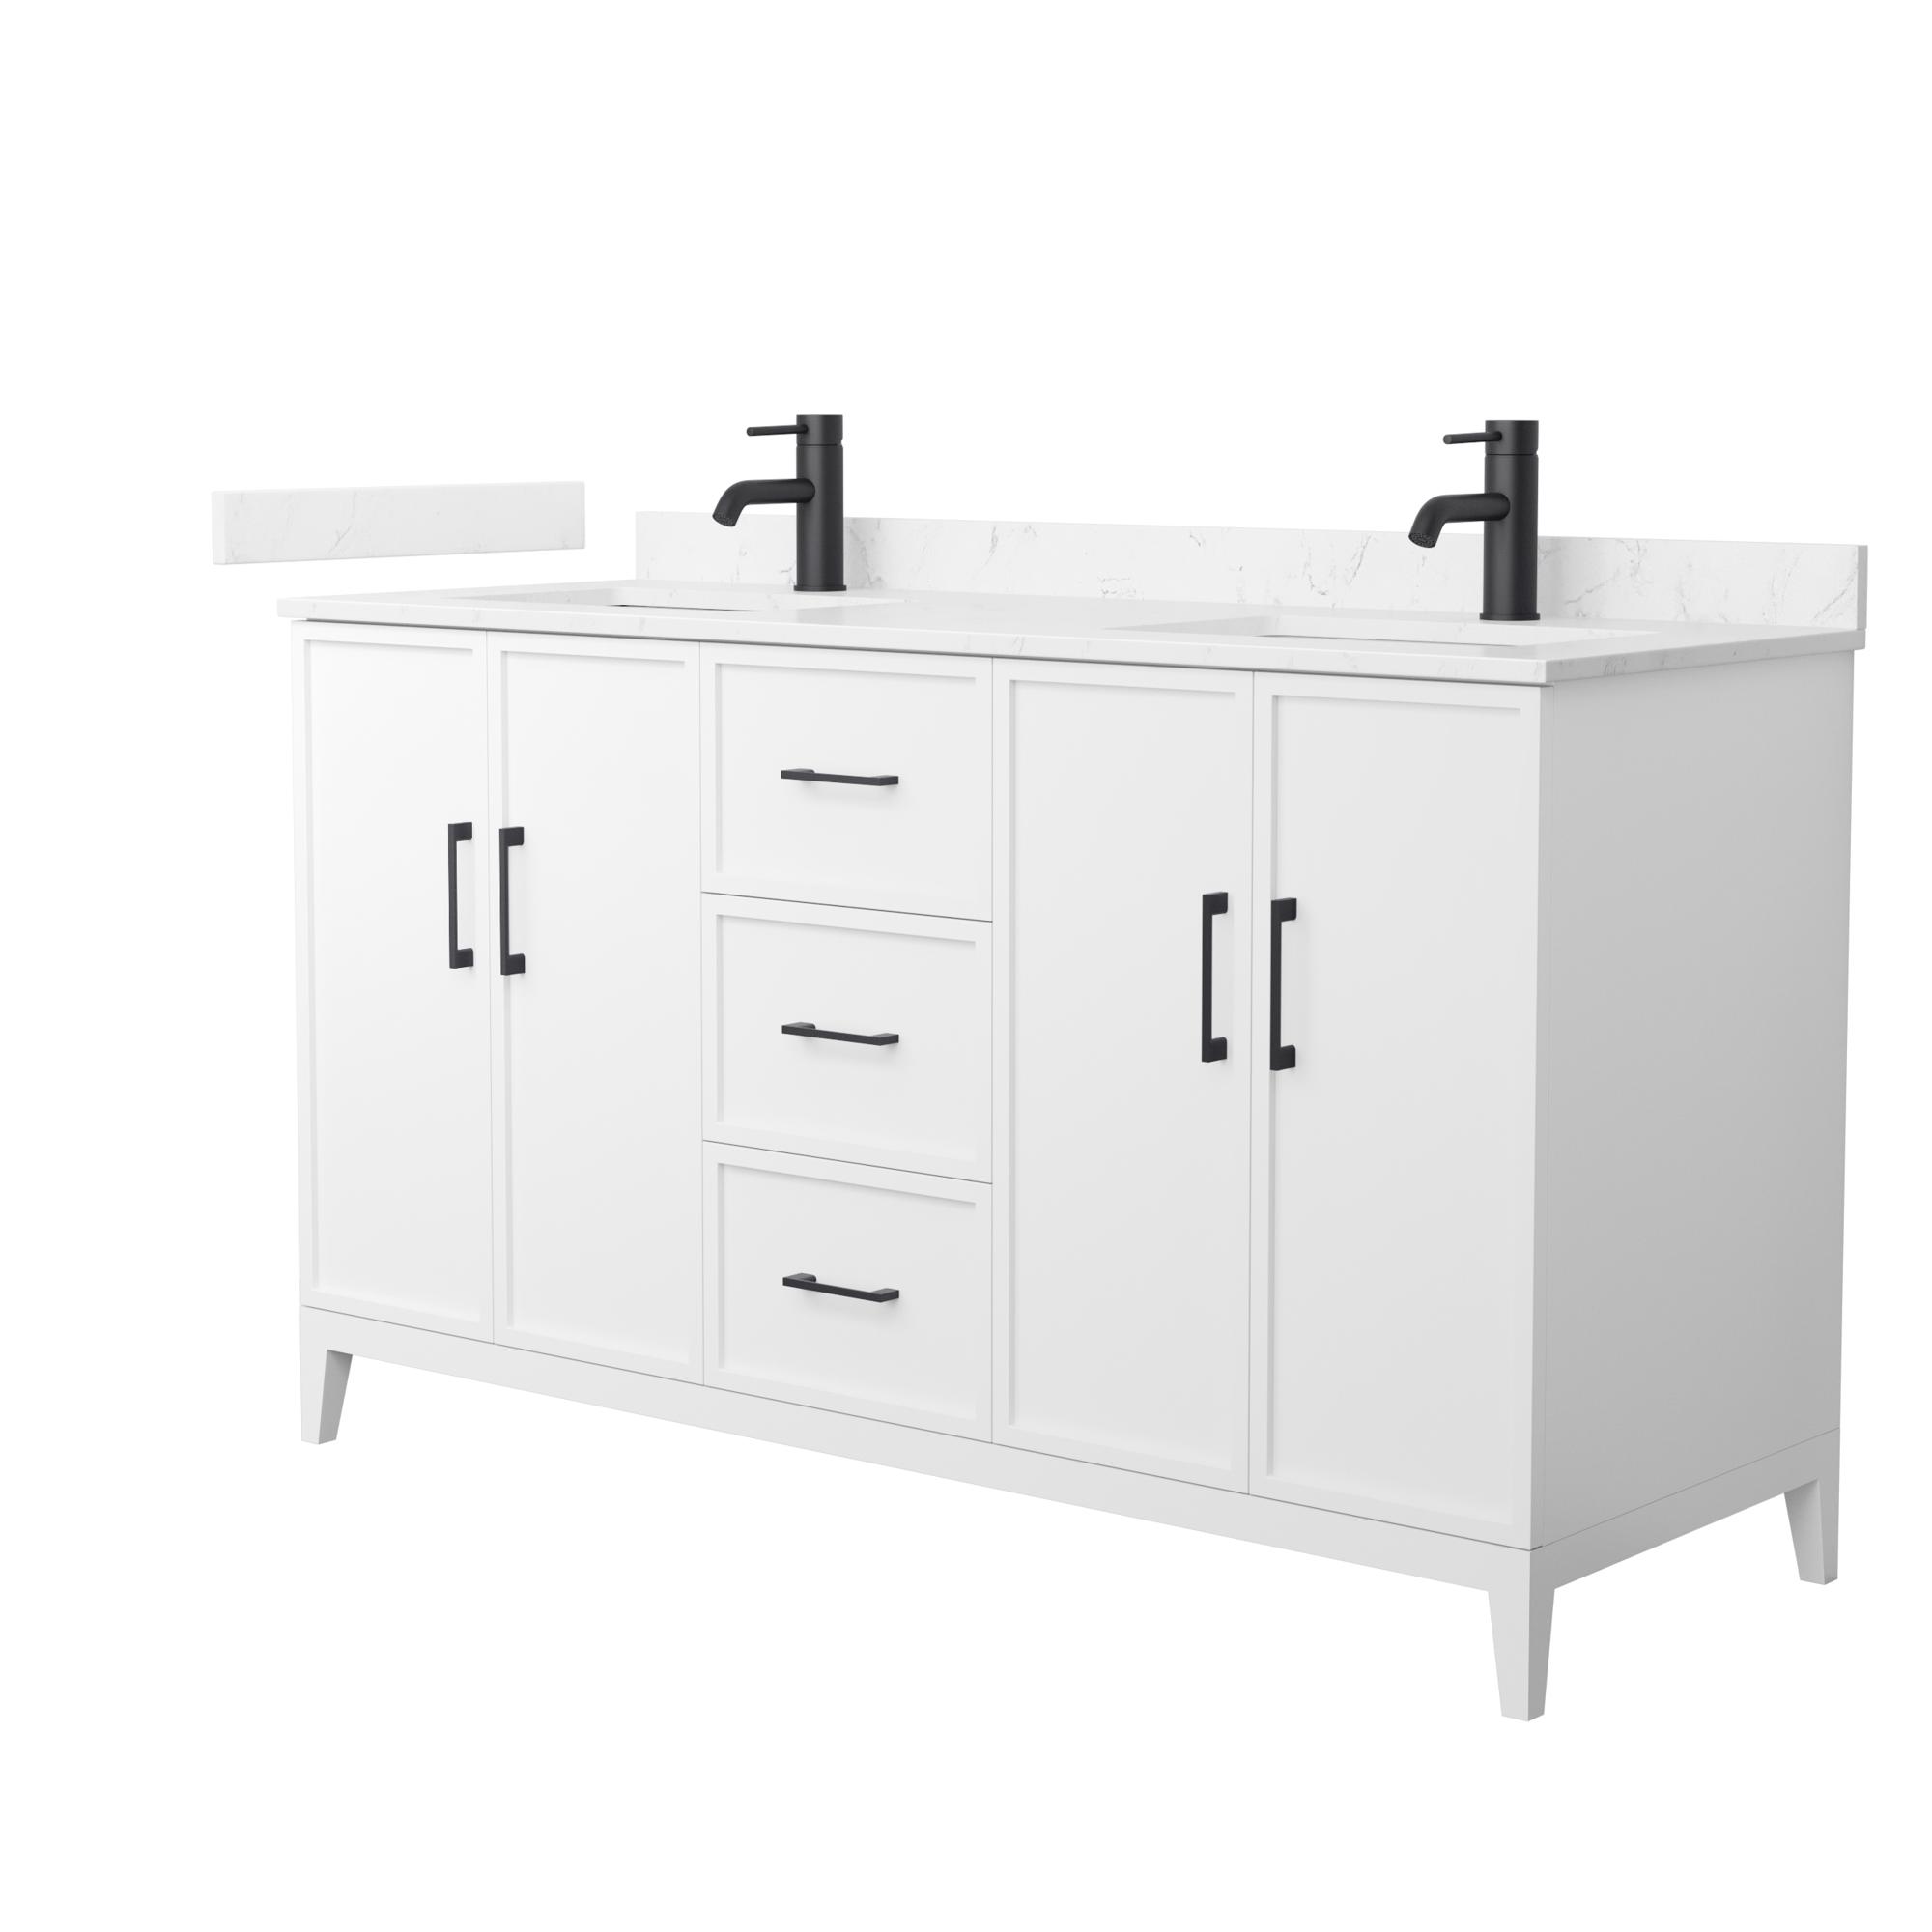 60" Transitional Double Vanity Base in White, 7 Top Options with 2 Hardware Option